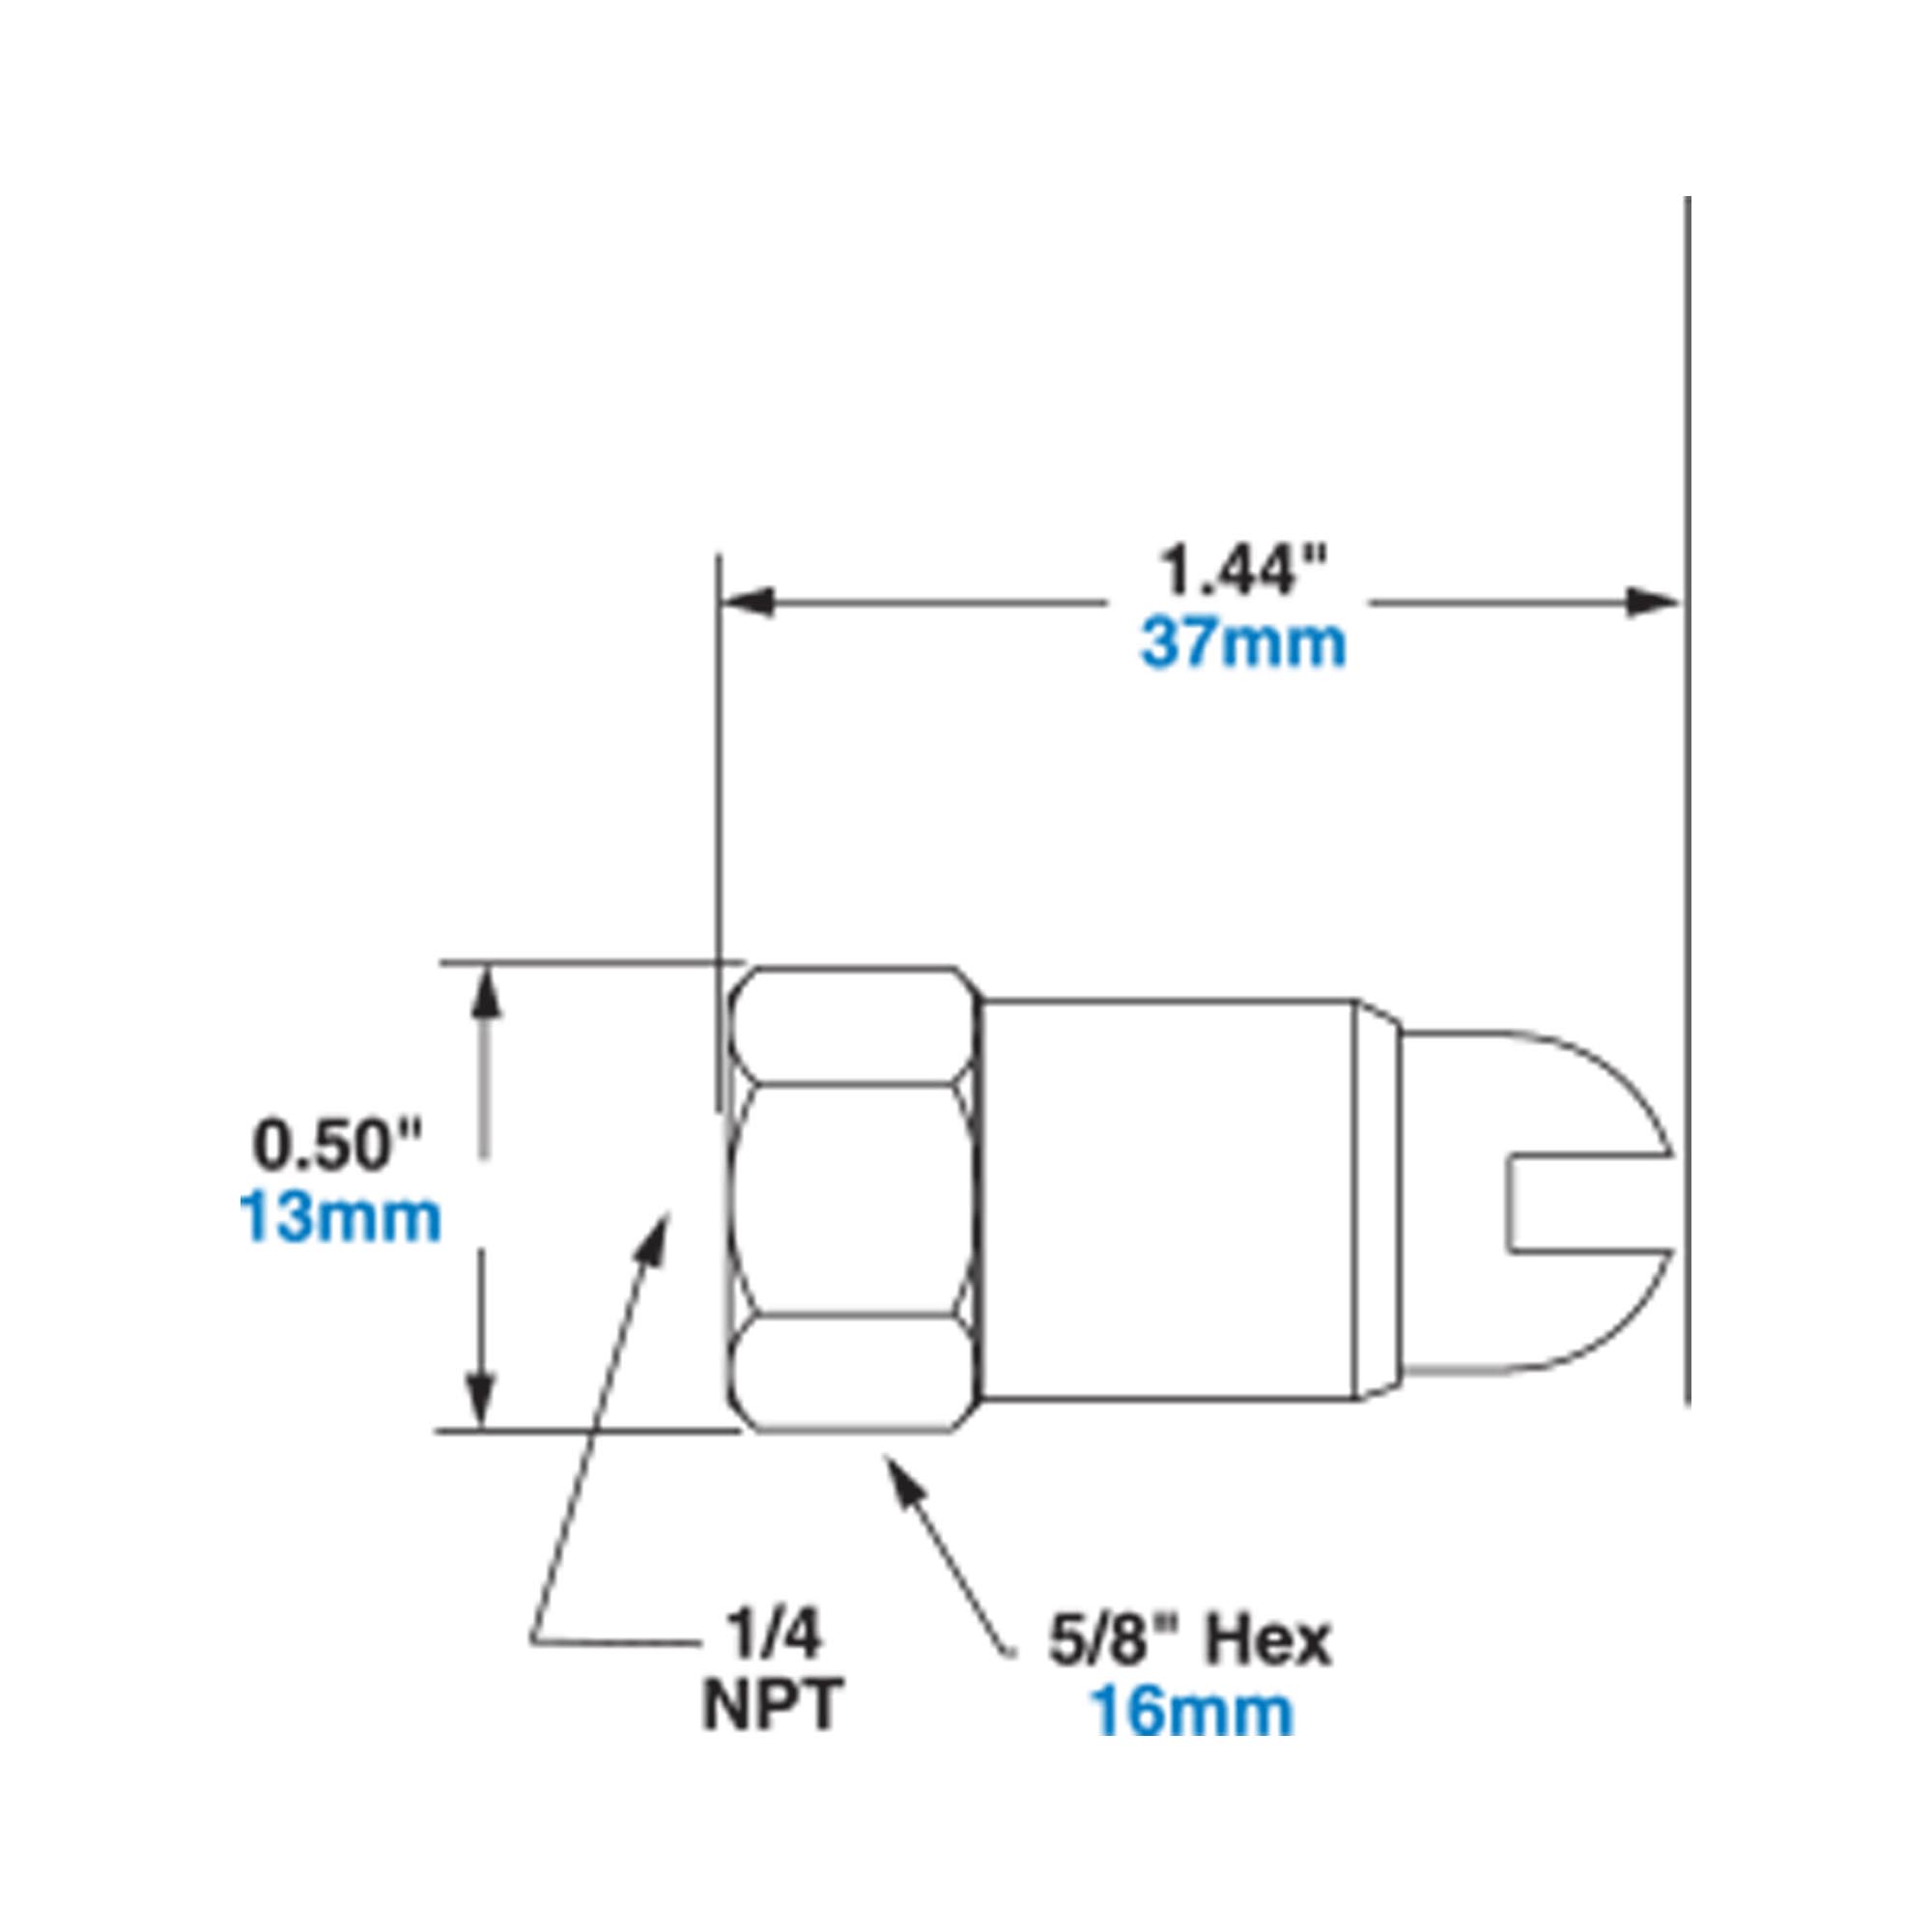 EXAIR Safety Air Nozzle Dimensions